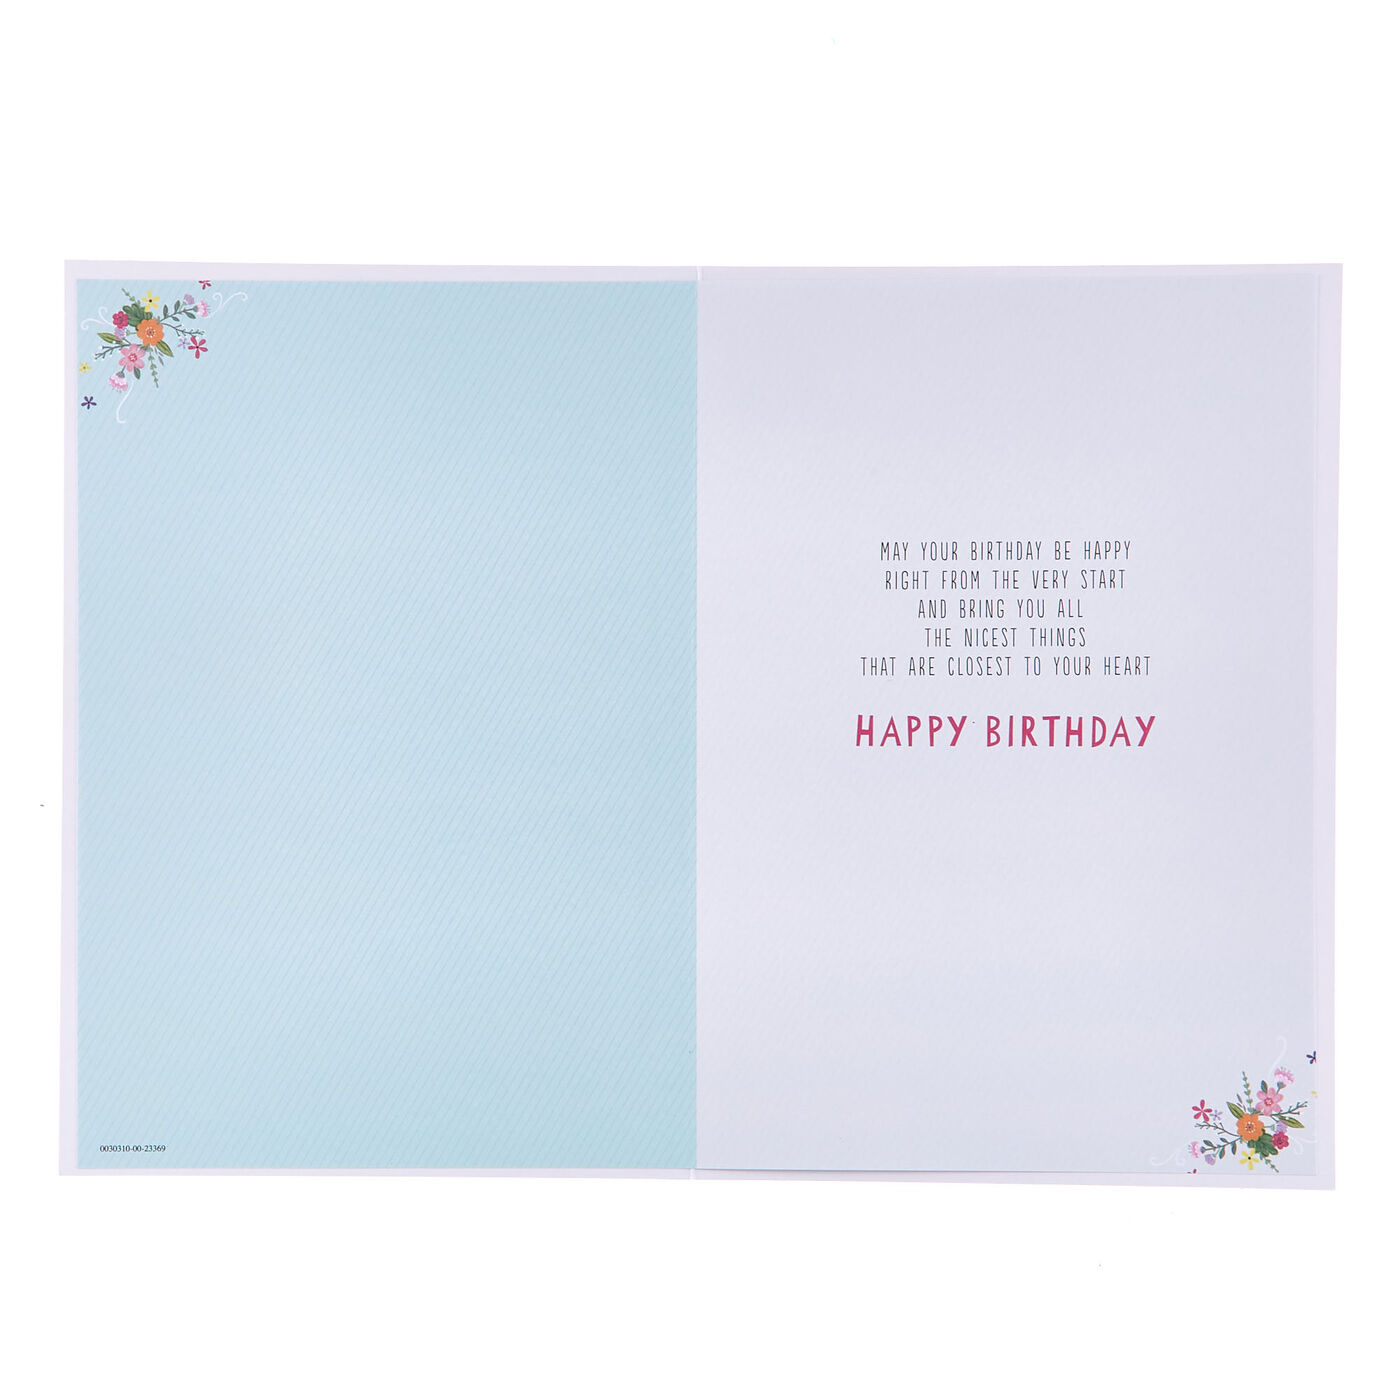 Buy Birthday Card - Special Friend With Love for GBP 0.99 | Card Factory UK